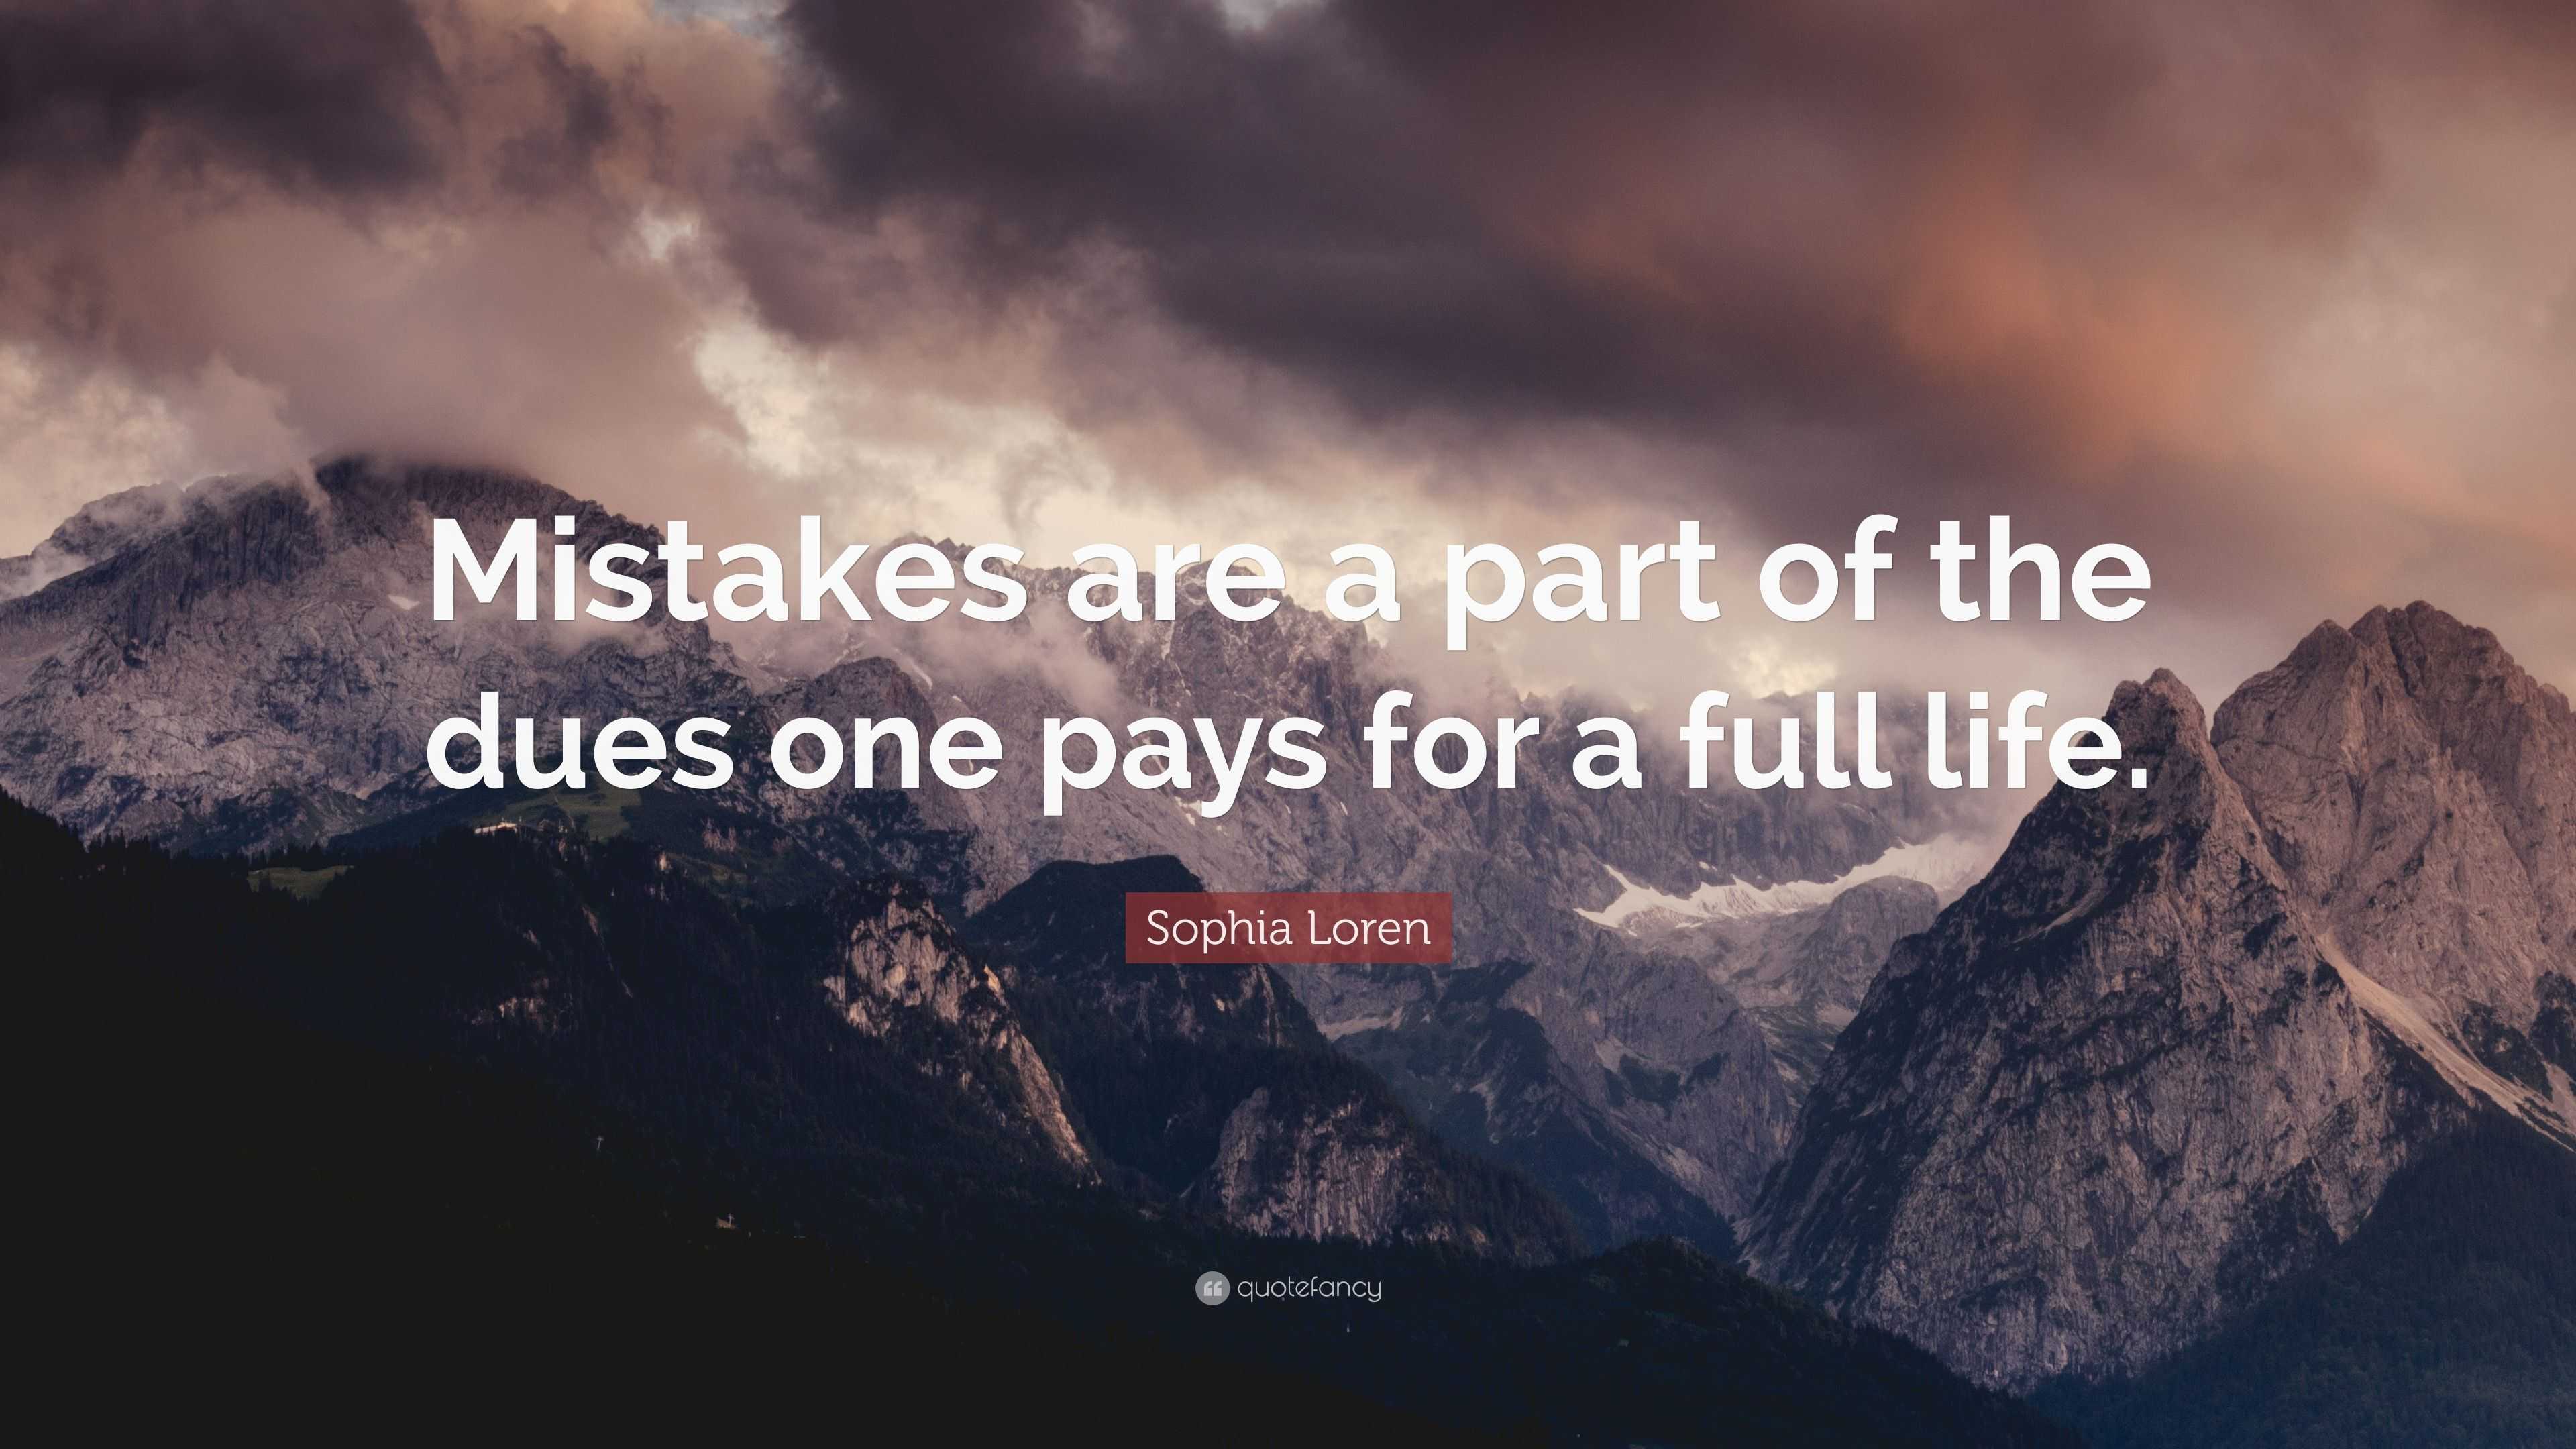 Sophia Loren Quote: Mistakes are a part of the dues one pays for a